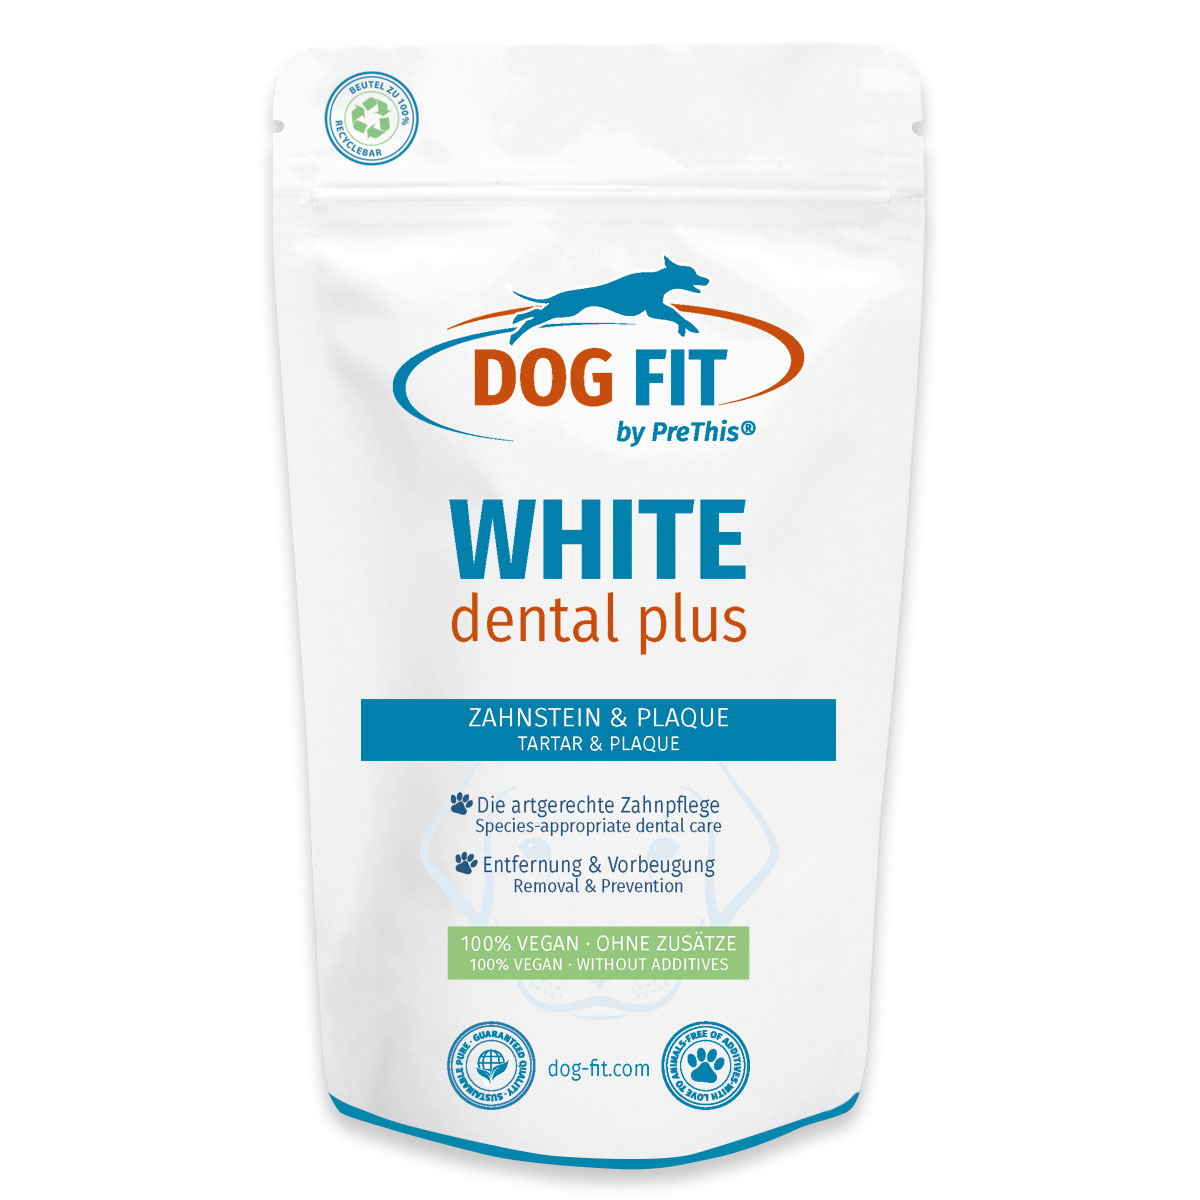 DOG FIT by PreThis® WHITE dental plus tartar remover for dogs